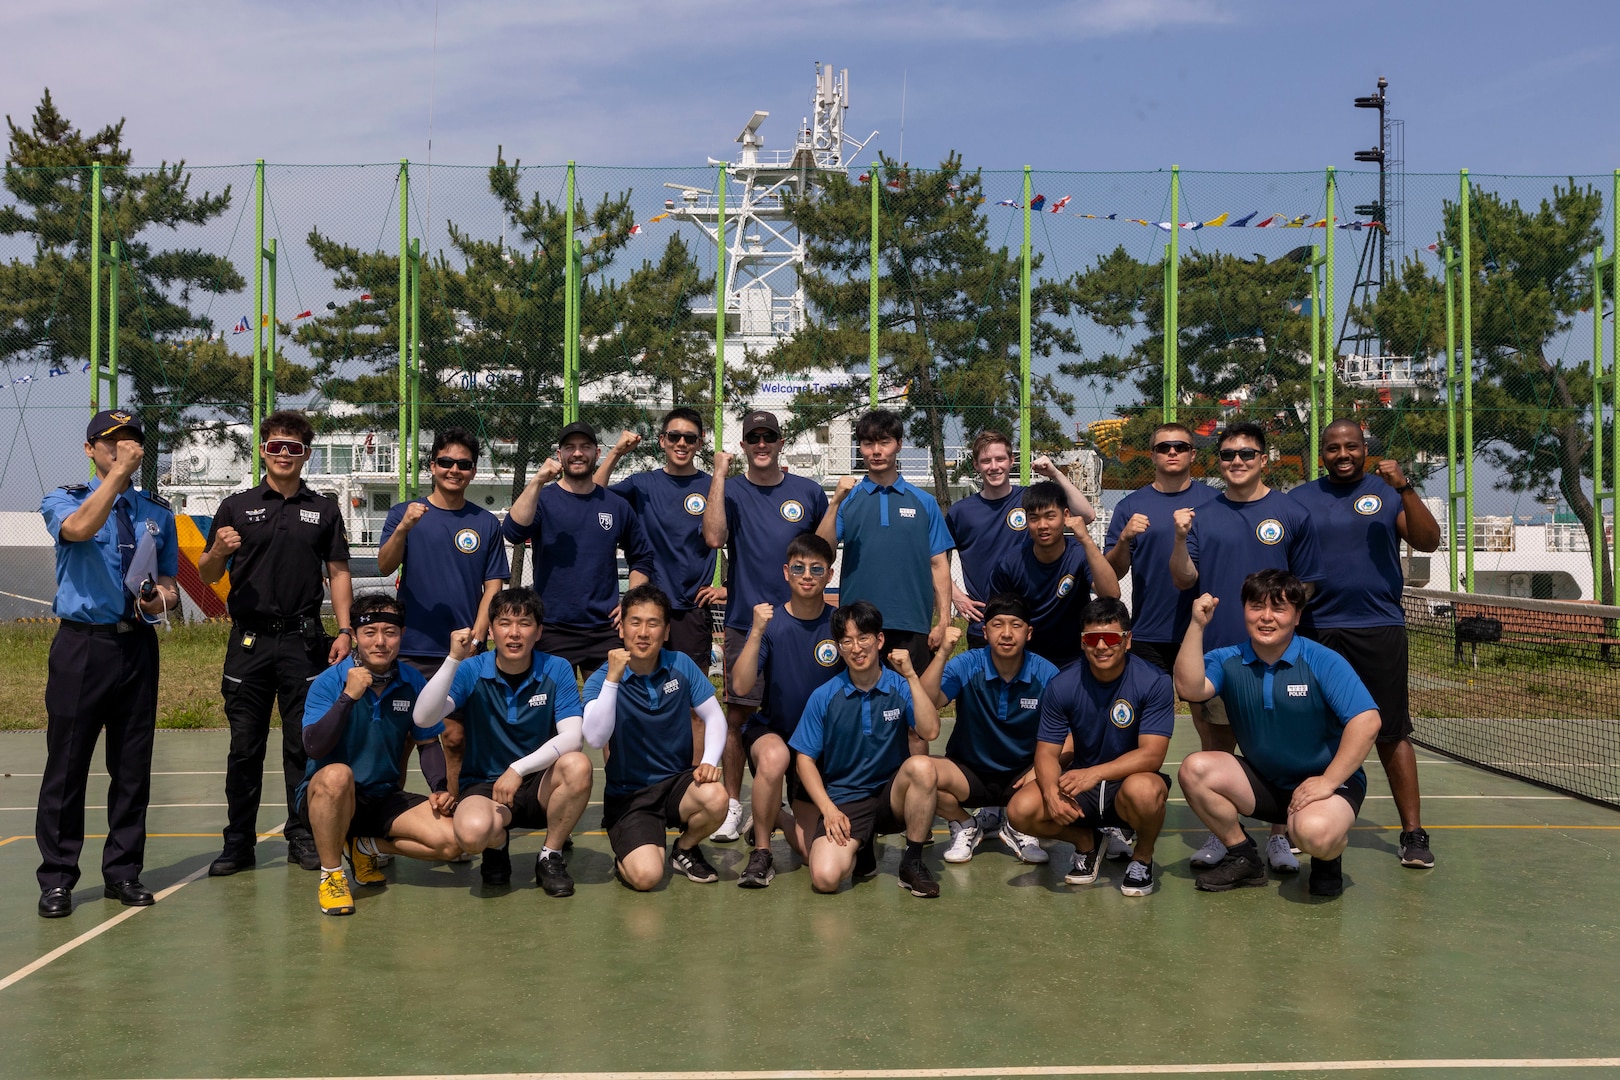 U.S. Coast Guardsmen assigned to the U.S. Coast Guard Cutter Waesche (WMSL-751) and members of the Korea Coast Guard pose for a photo during a sports day in Pohang, Republic of Korea, June 10, 2024. United States and Korea Coast Guardsmen came together to participate in a friendly competition of jokgu to build camaraderie between the servicemembers. Waesche is the second U.S. Coast Guard National Security Cutter deployed to the Indo-Pacific in 2024. Coast Guard cutters routinely deploy to the region to engage with partner nations to ensure a free and open Indo-Pacific. (U.S. Marine Corps photo by Cpl. Elijah Murphy)